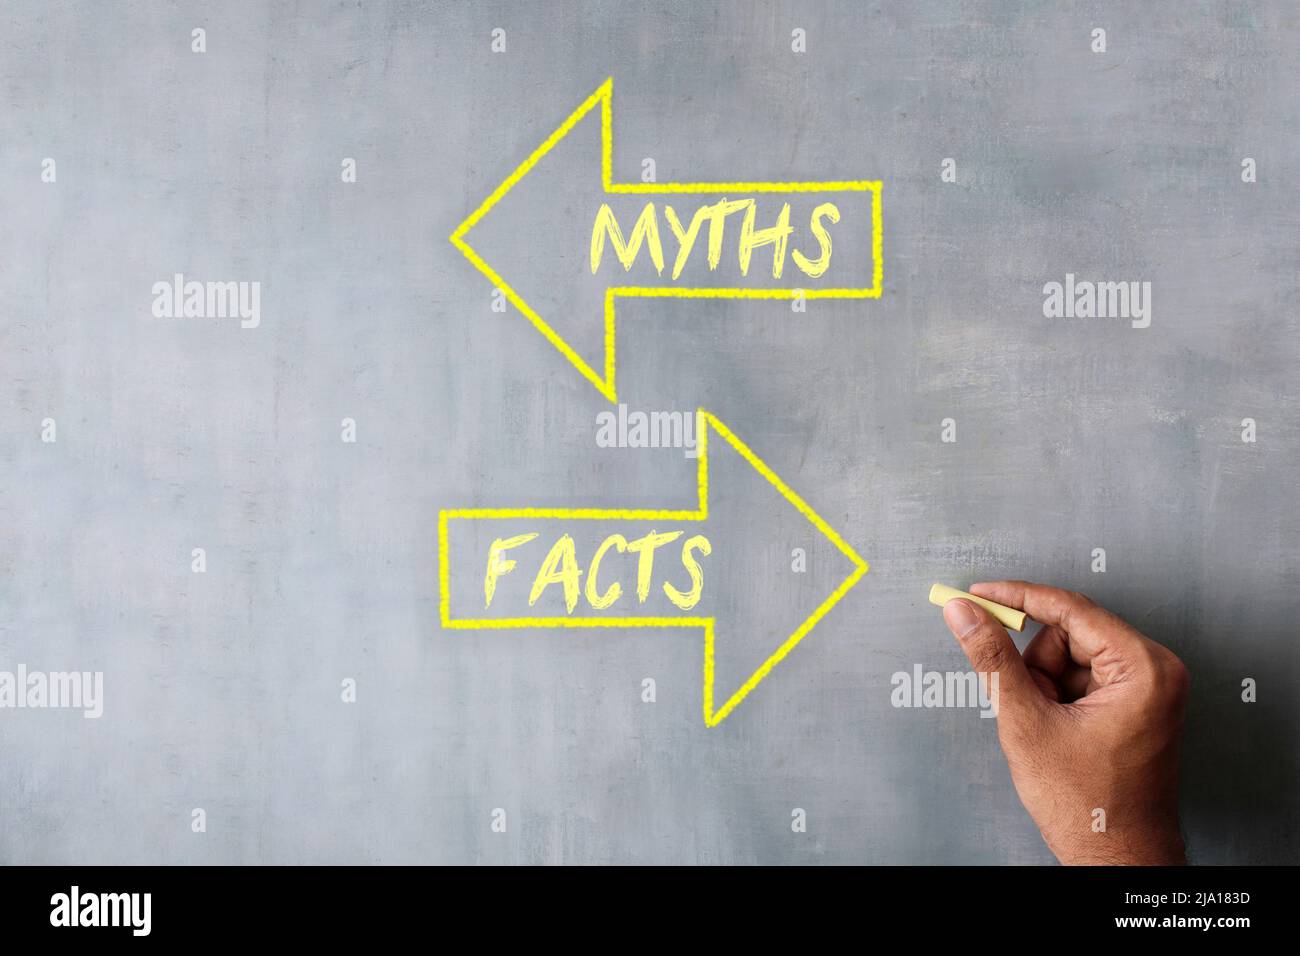 Hand draw arrow with text MYTHS and FACTS using chalk. Myths vs facts concept. Stock Photo